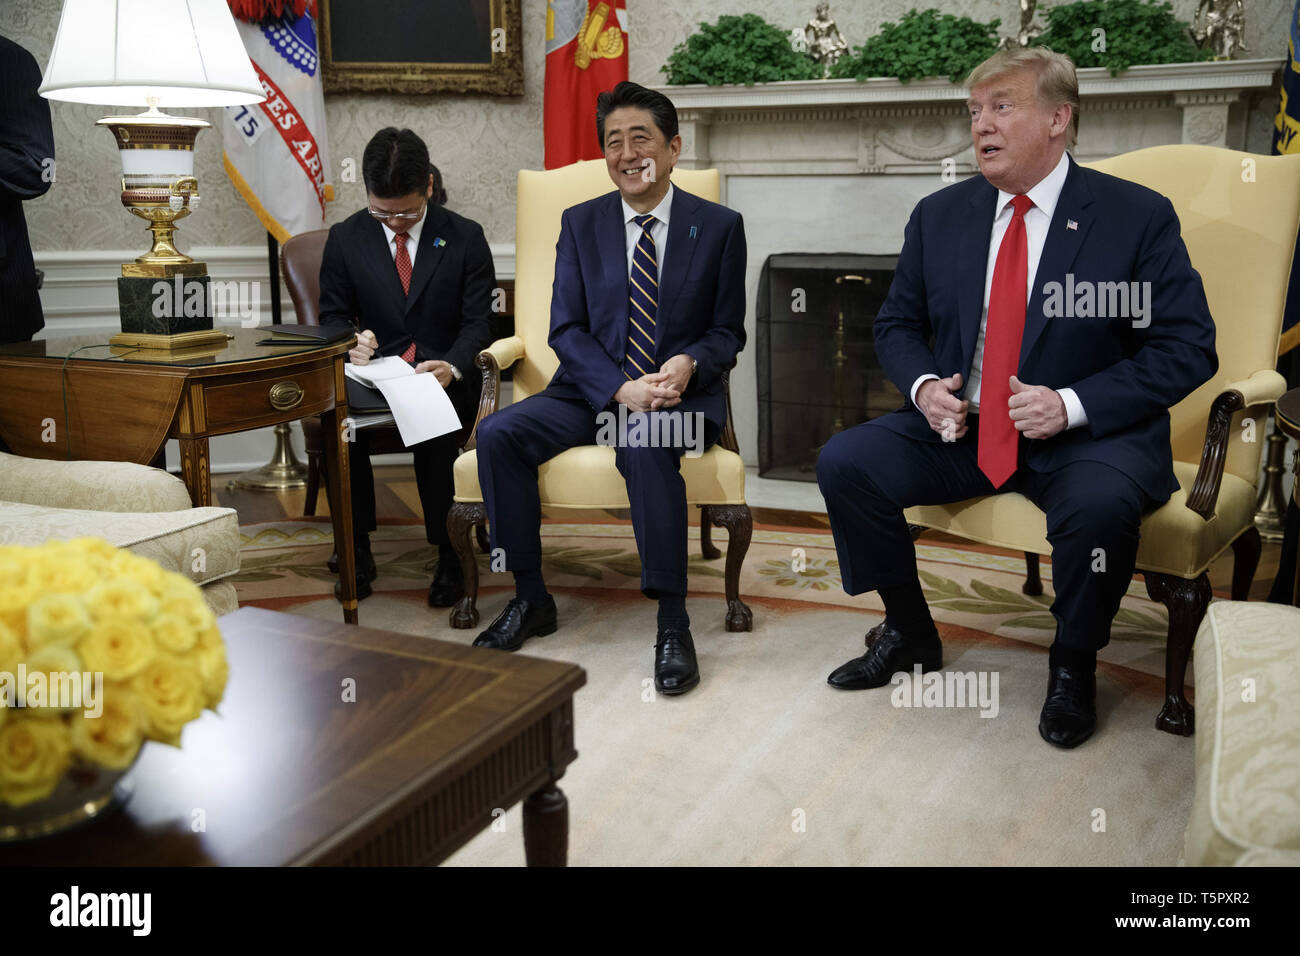 Washington, District of Columbia, USA. 26th Apr, 2019. US President Donald J. Trump meets with Japanese Prime Minister Shinzo Abe in the Oval Office of the White House in Washington, DC, USA, 26 April 2019. President Trump is hosting a dinner for Prime Minister Abe and his wife celebrating the First Lady's 49th birthday.Credit: Shawn Thew/Pool via CNP Credit: Shawn Thew/CNP/ZUMA Wire/Alamy Live News Stock Photo